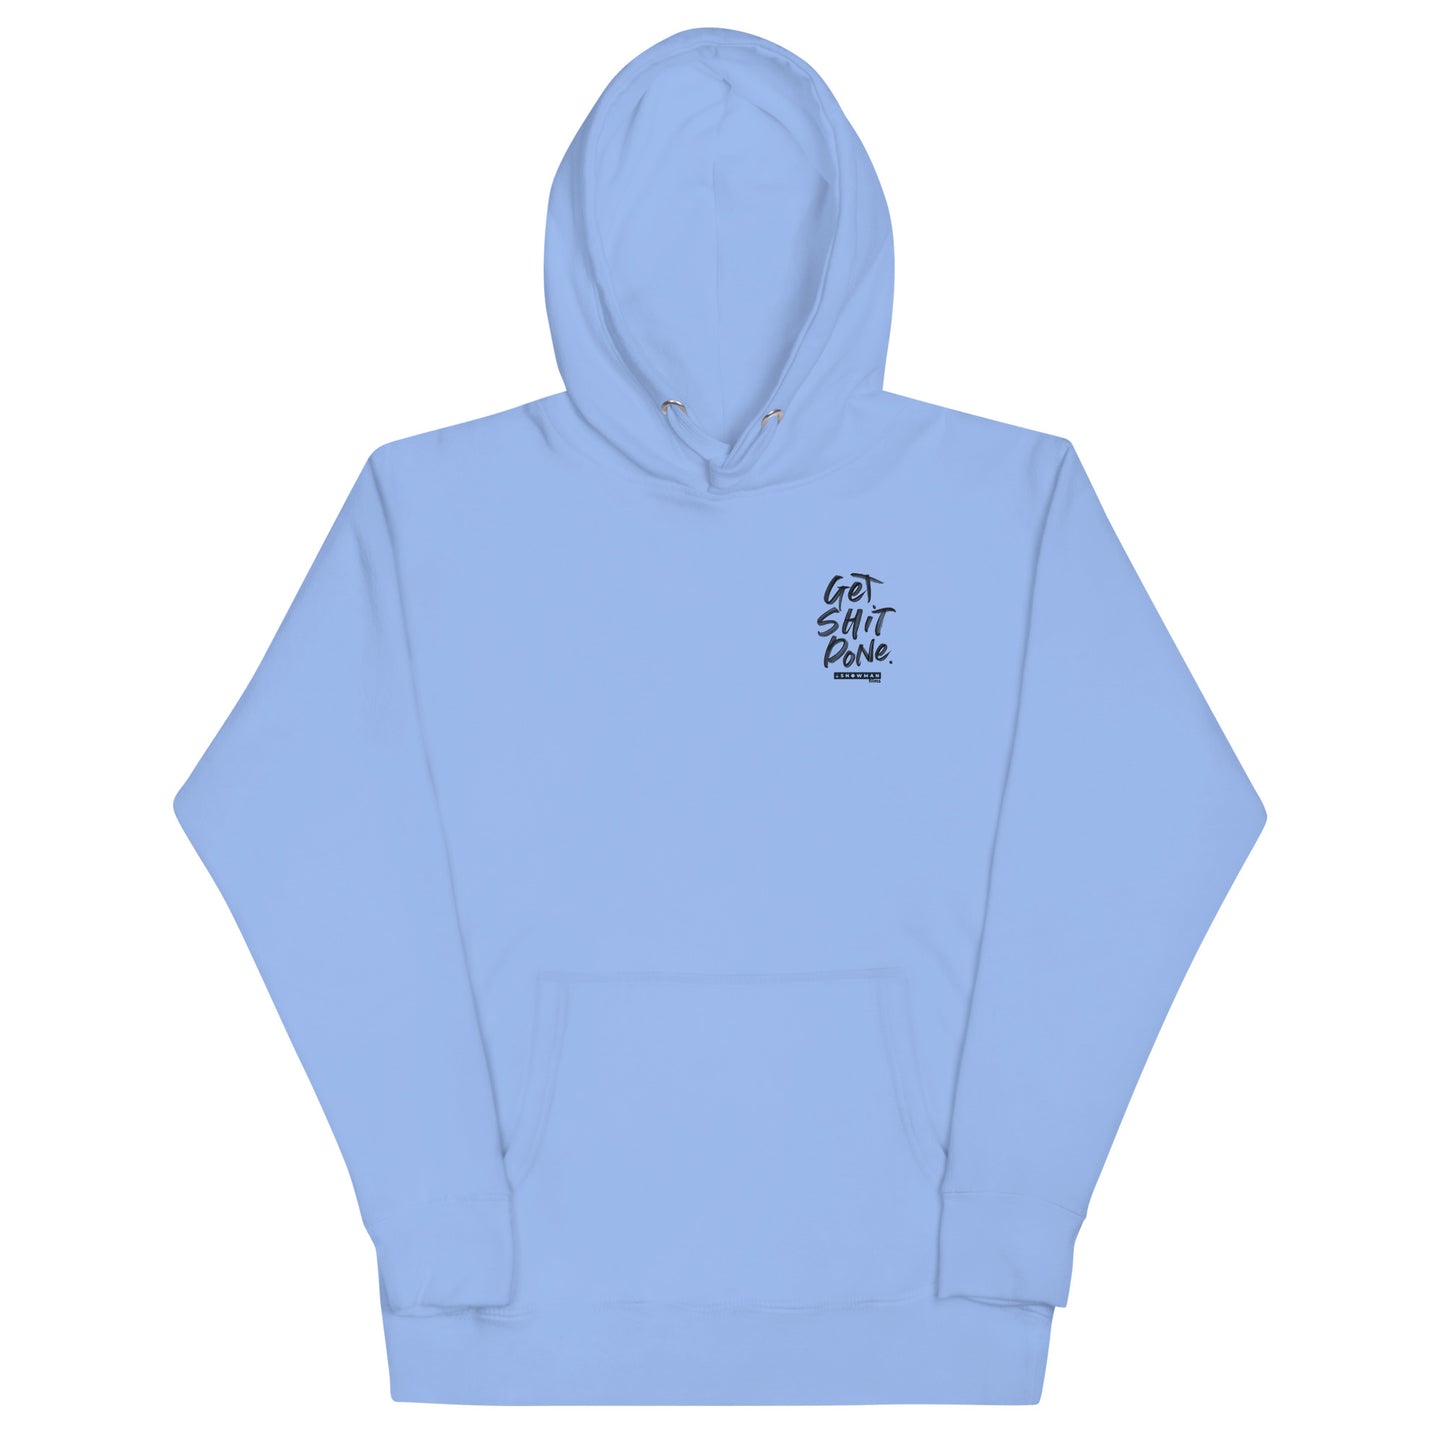 Get Shit Done Hoodie